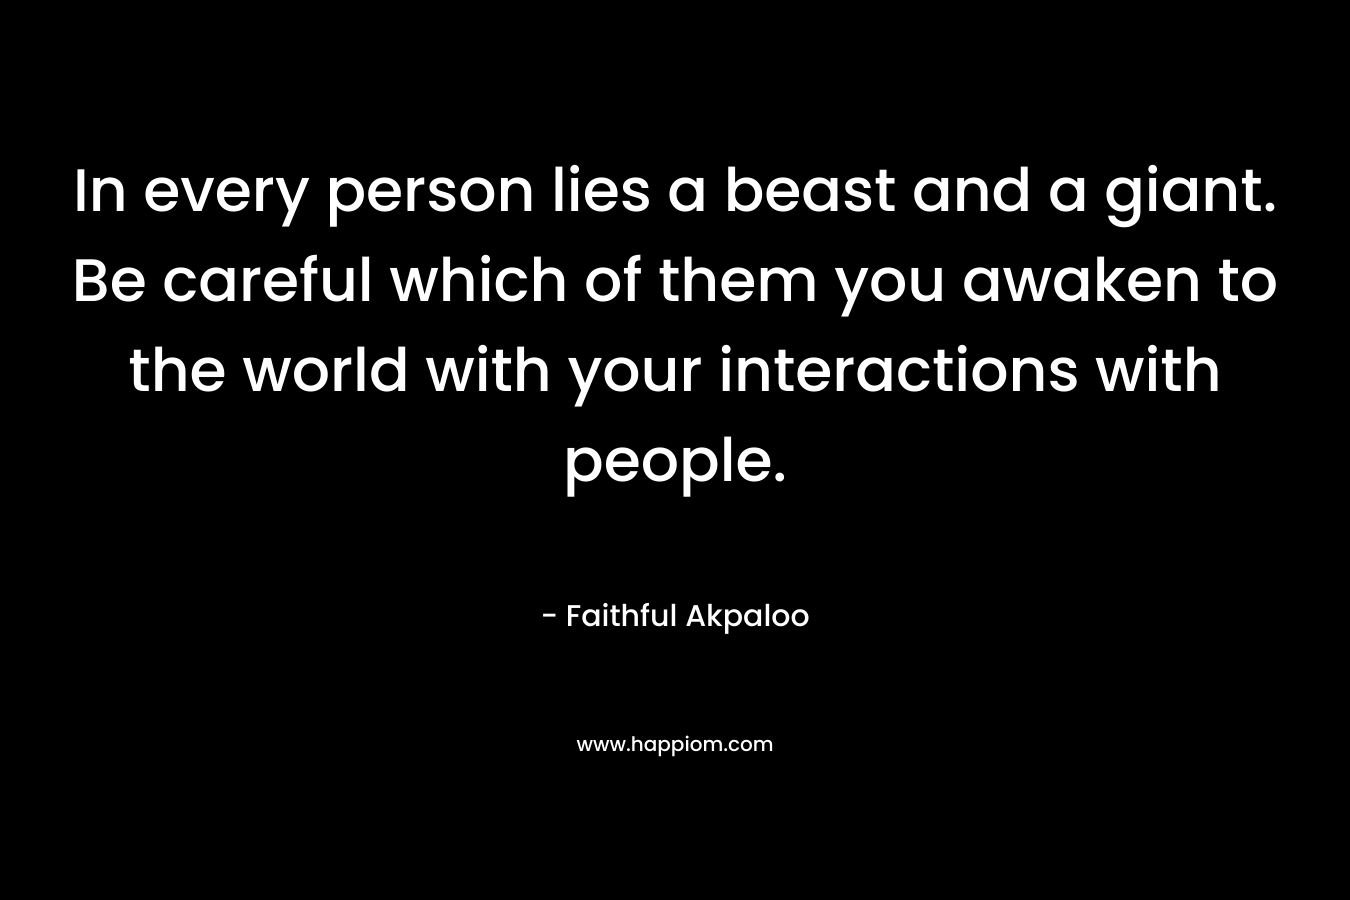 In every person lies a beast and a giant. Be careful which of them you awaken to the world with your interactions with people. – Faithful Akpaloo